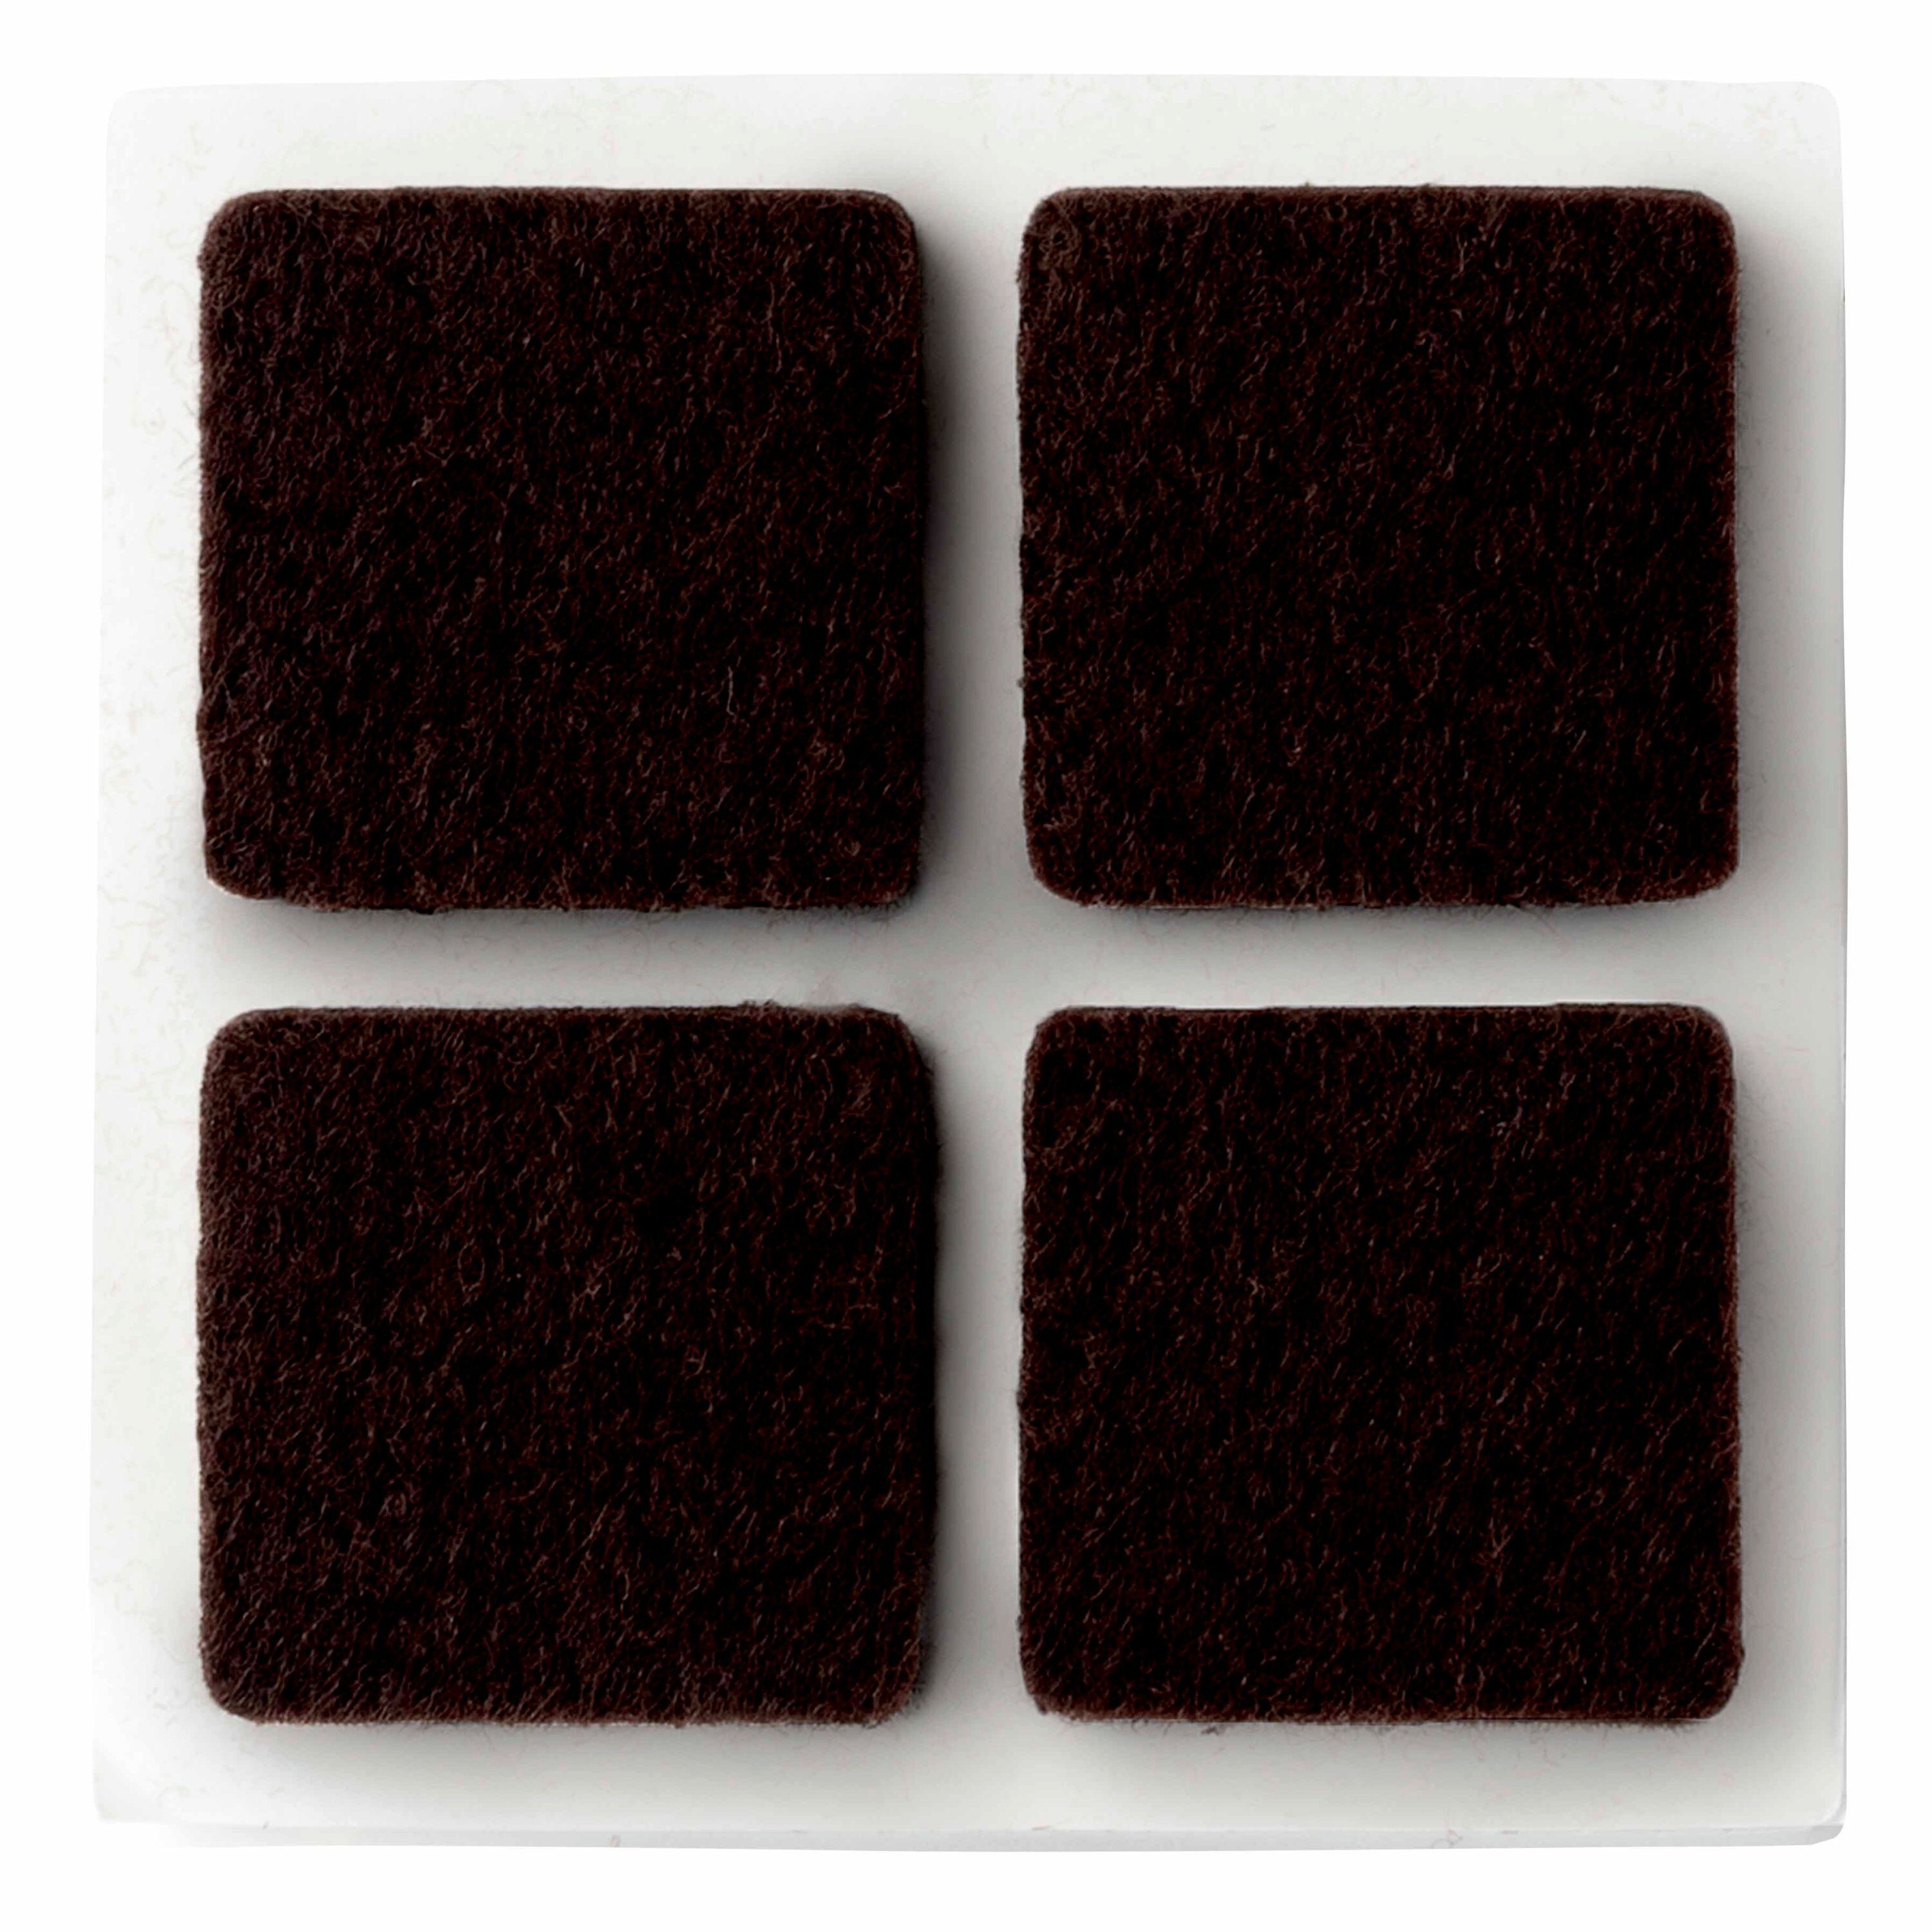 SoftTouch 5/16-in Brown Strip Felt Strips in the Felt Pads department at